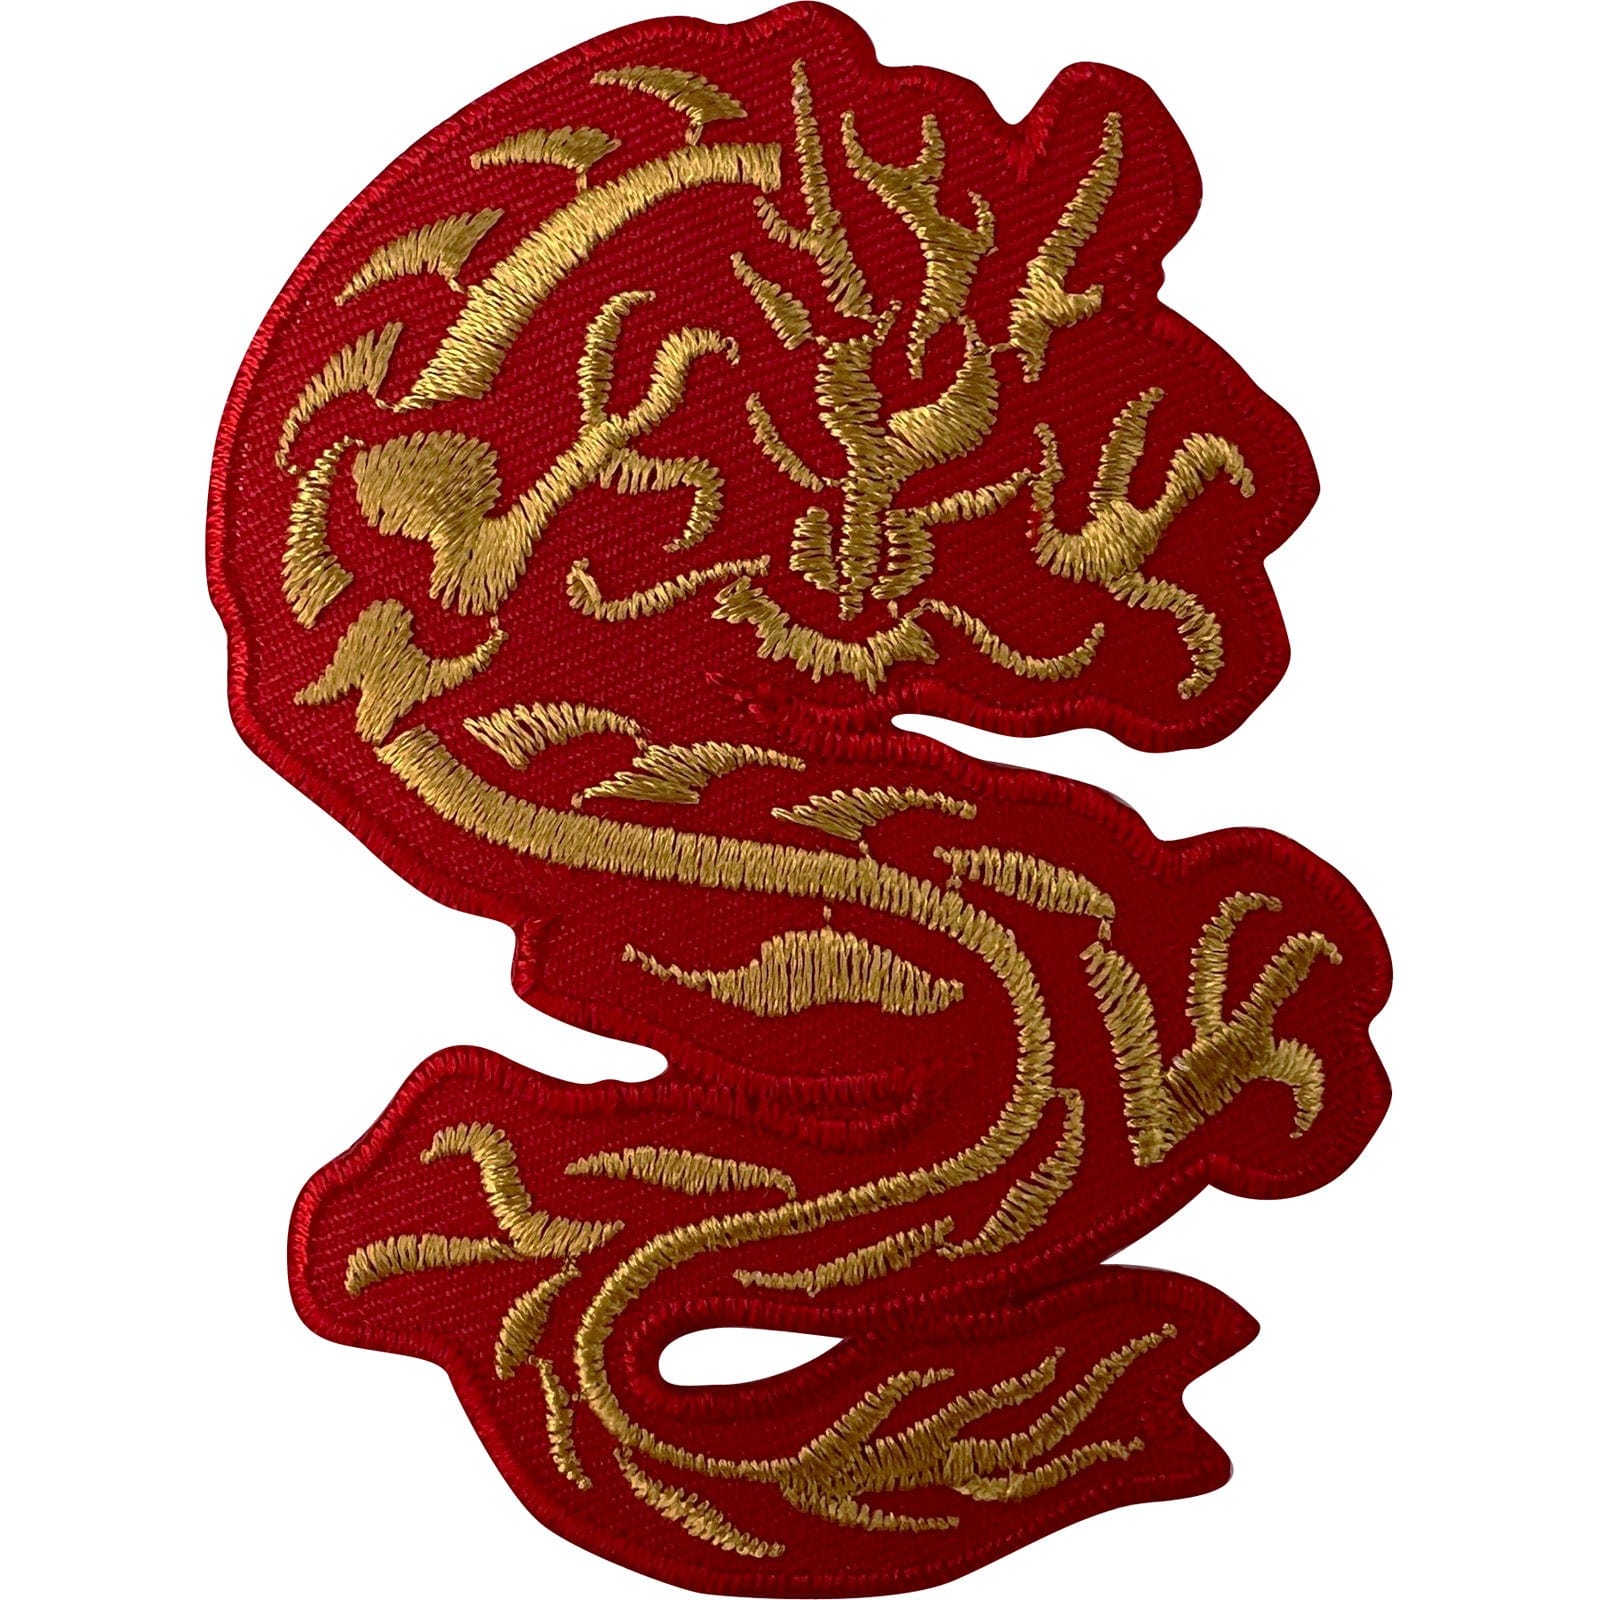 Red Gold Chinese Dragon Patch Iron Sew On Embroidery Badge Motif Decal Applique